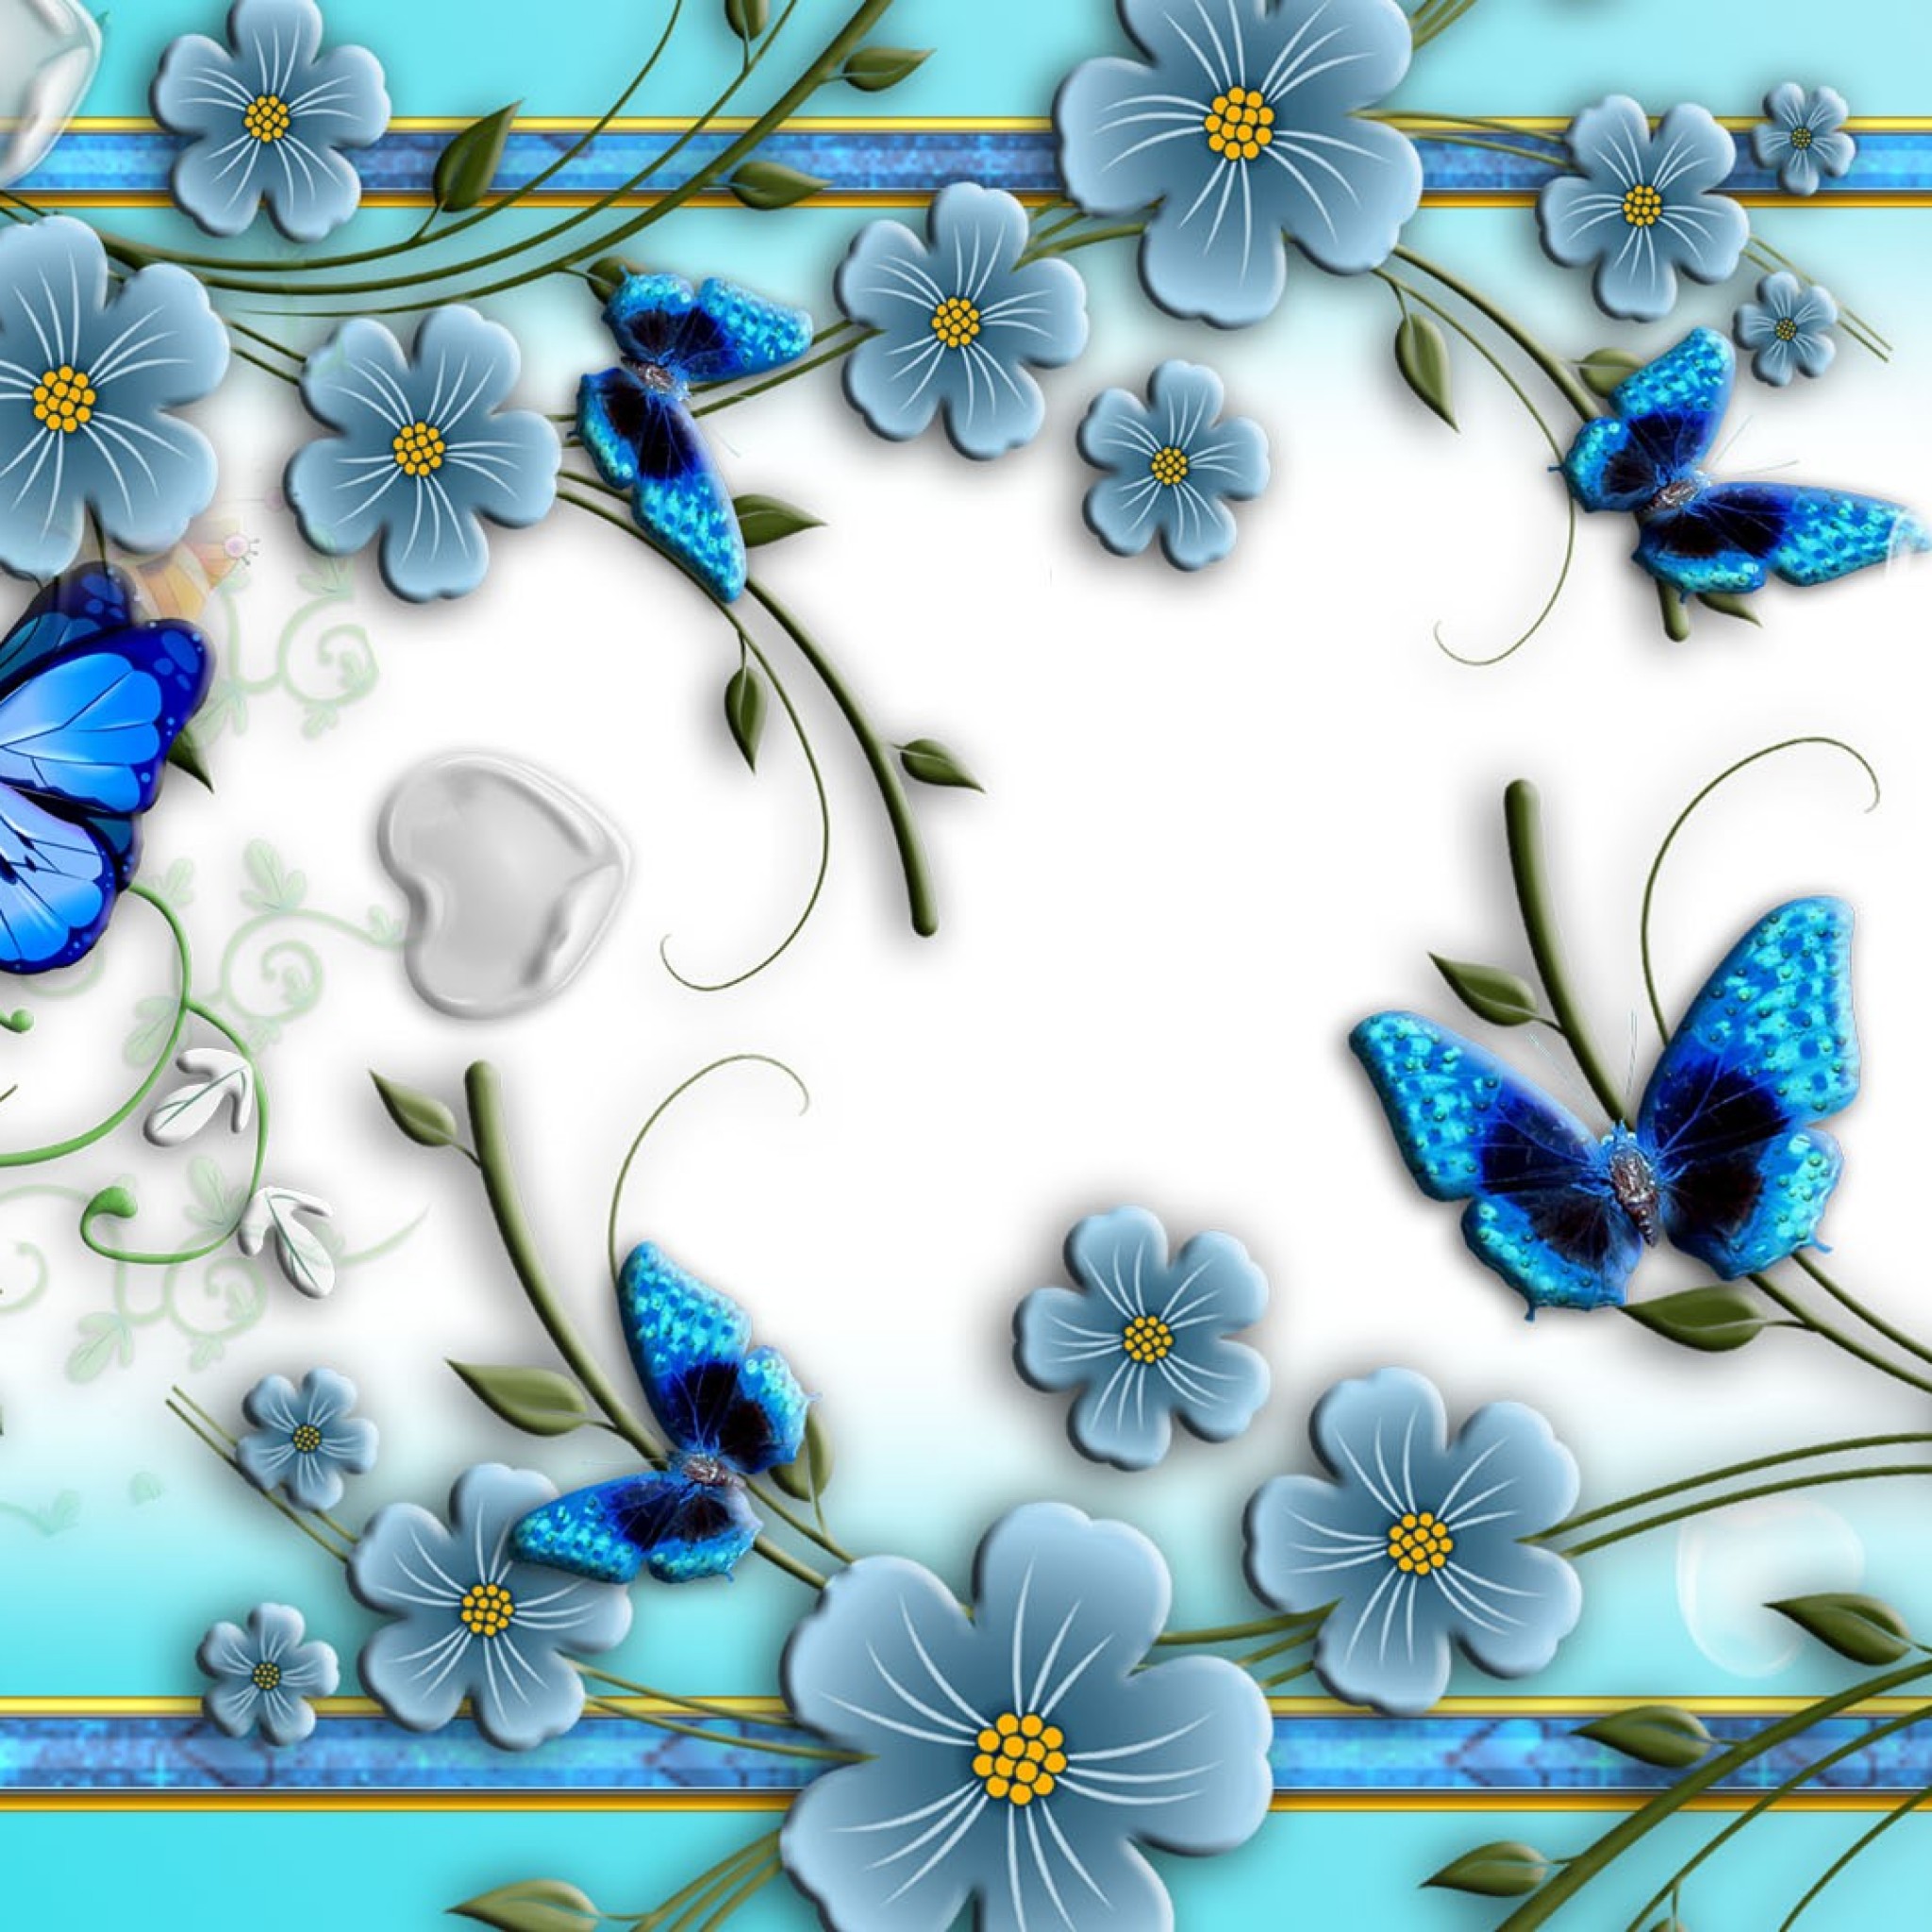 Viewing Gallery For Butterfly Wallpaper For Iphone Ipad タブレット壁紙ギャラリー